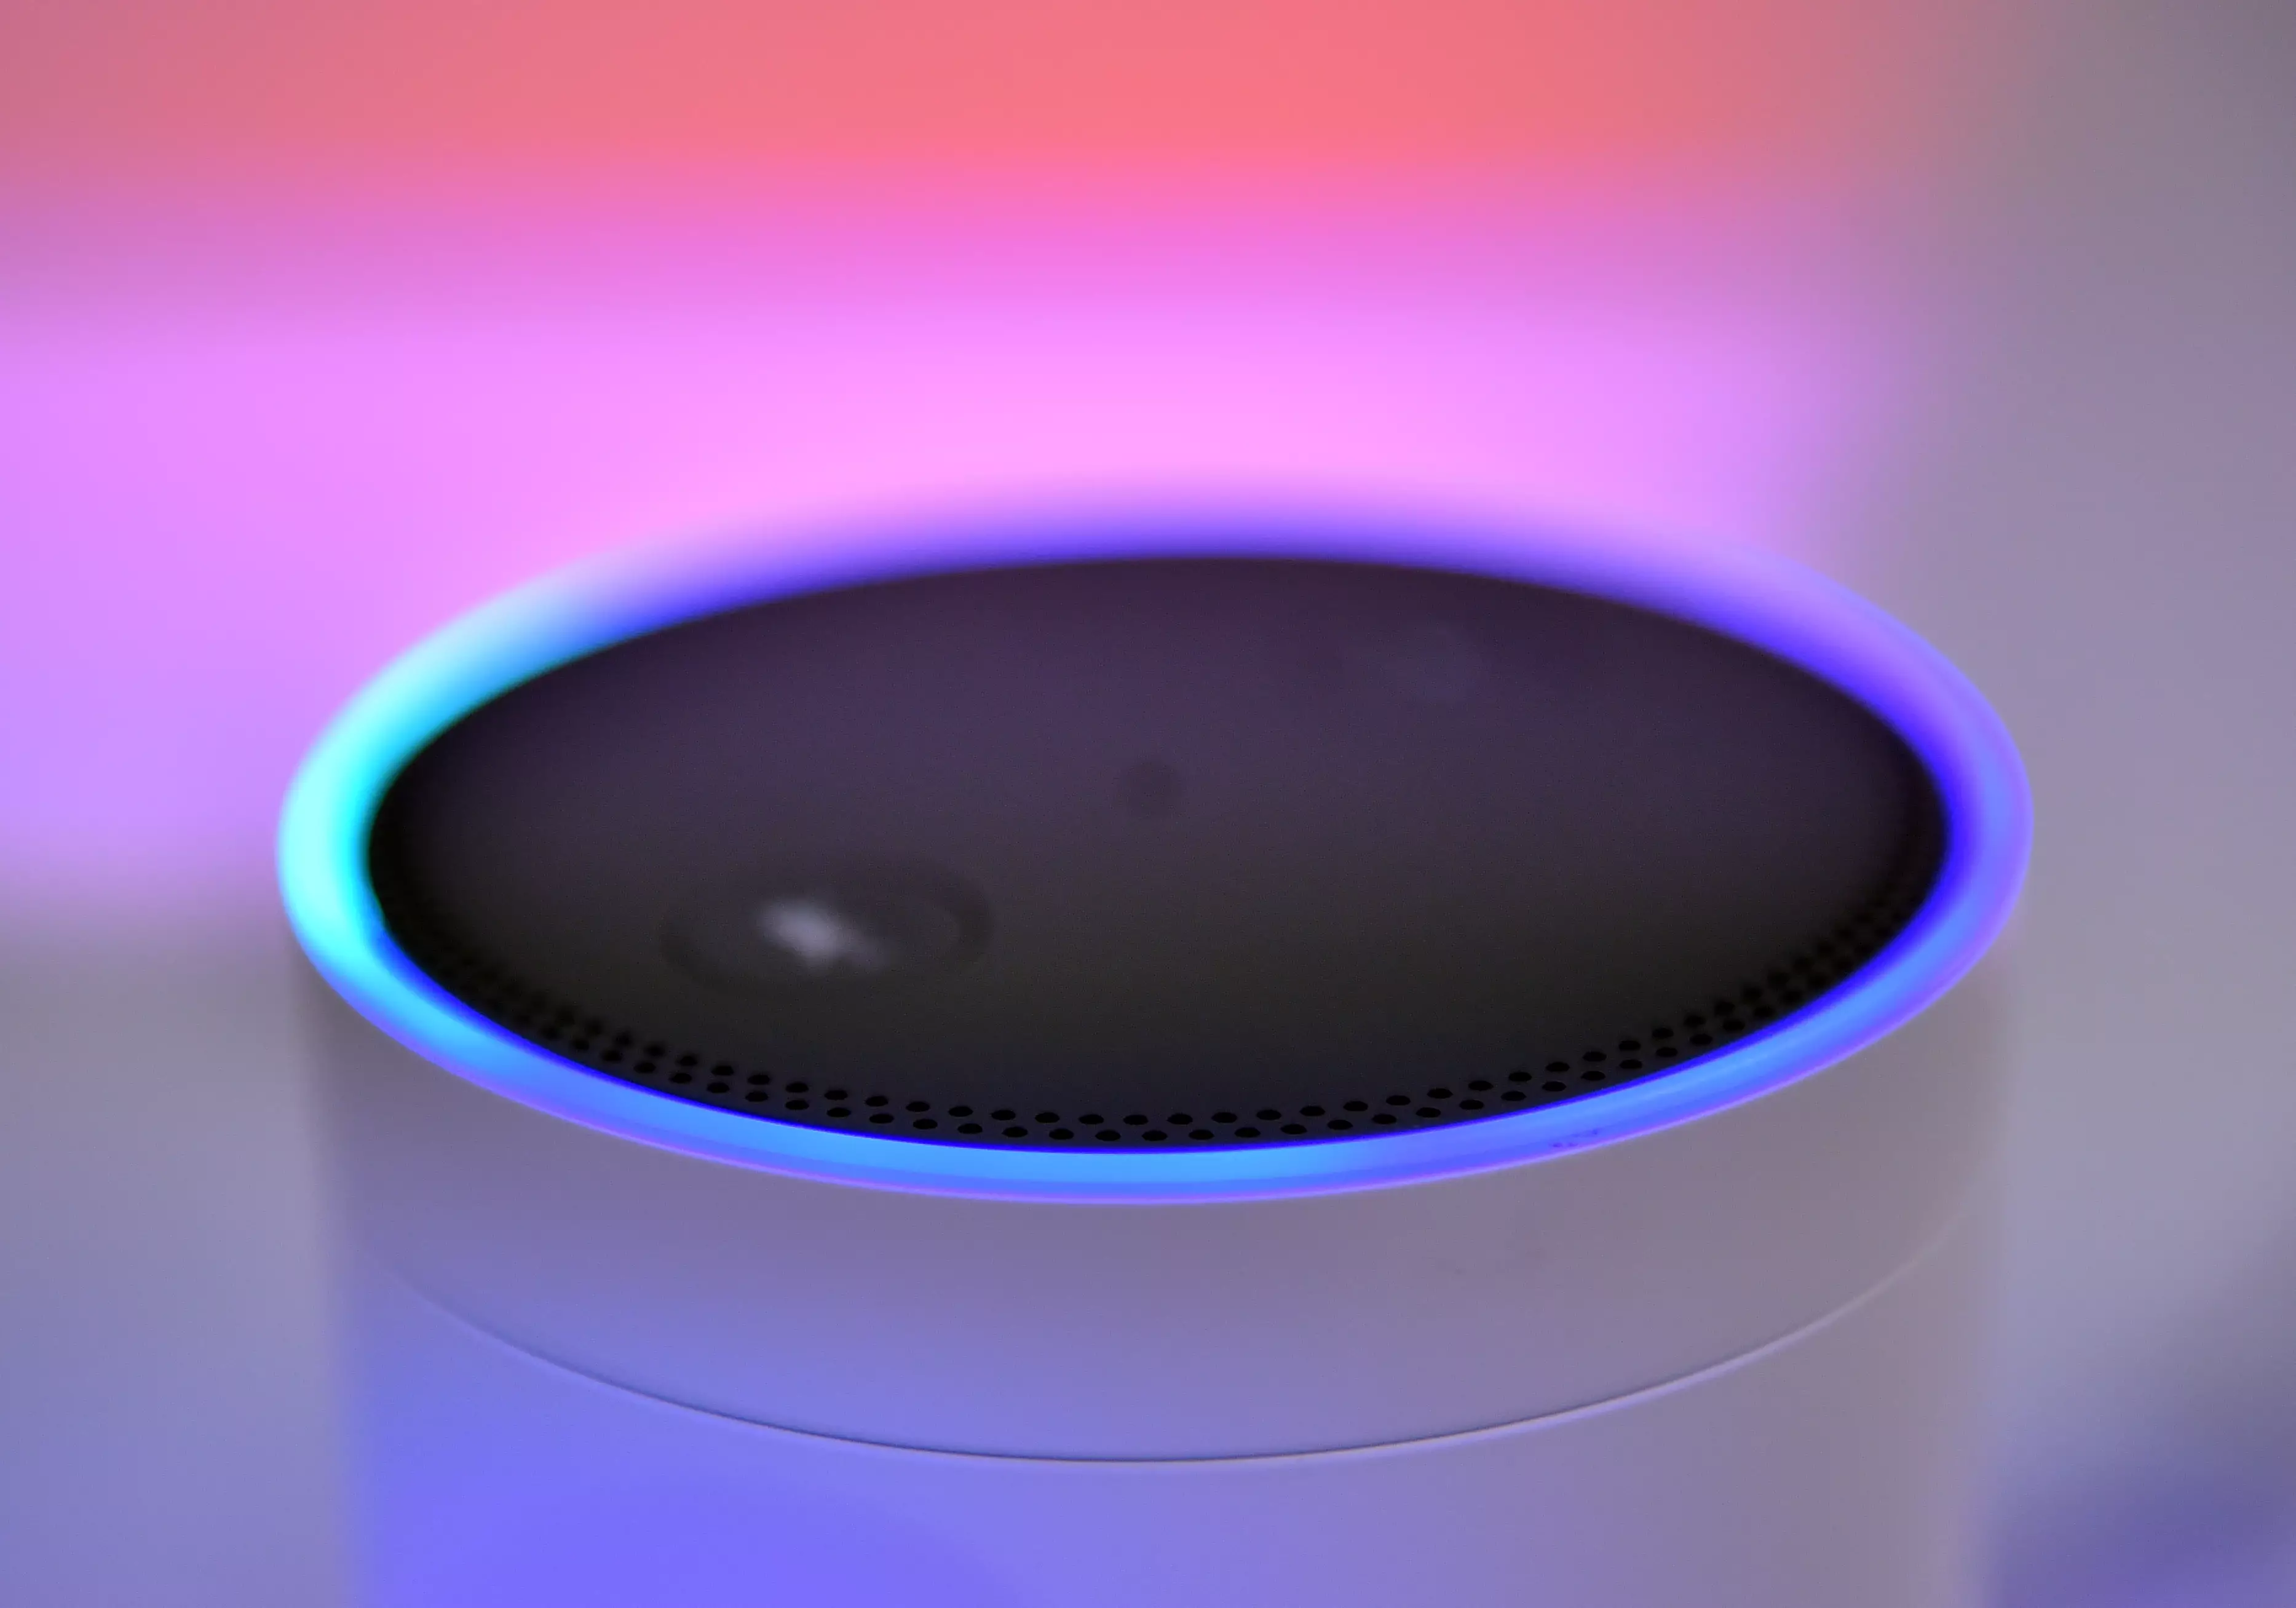 Thousands of users were left disappointed when their new Echo failed.